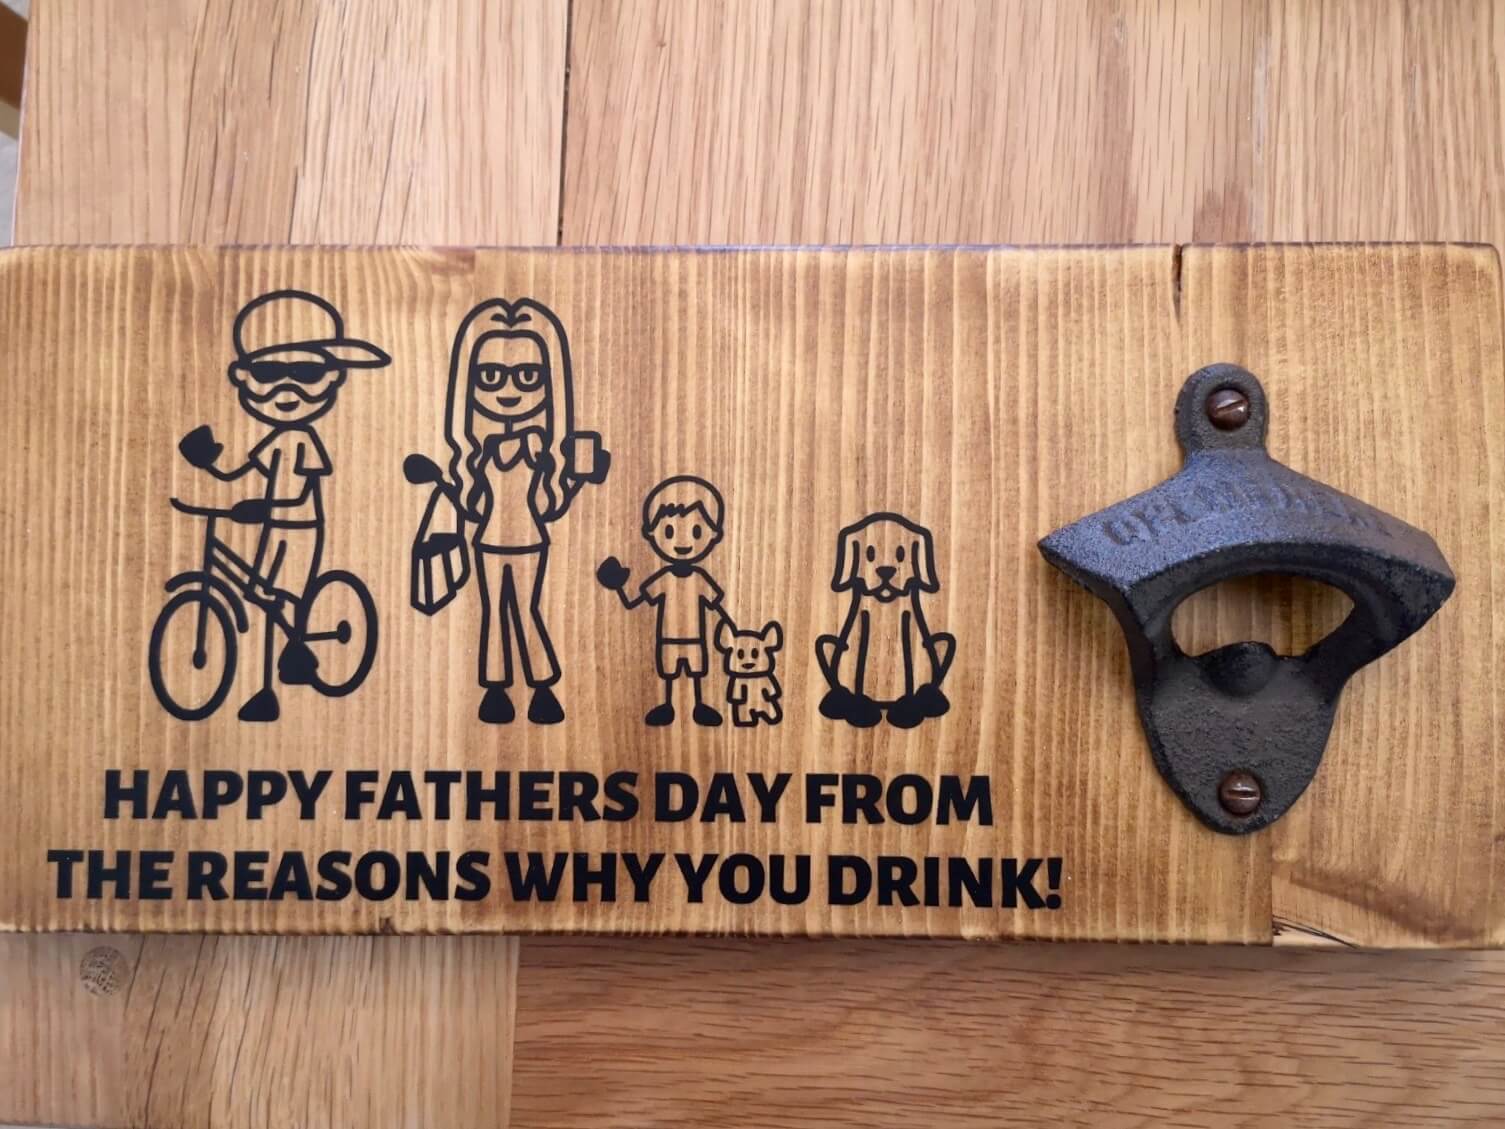 OriginalPeople personalised sticker as a father's day gift ideas